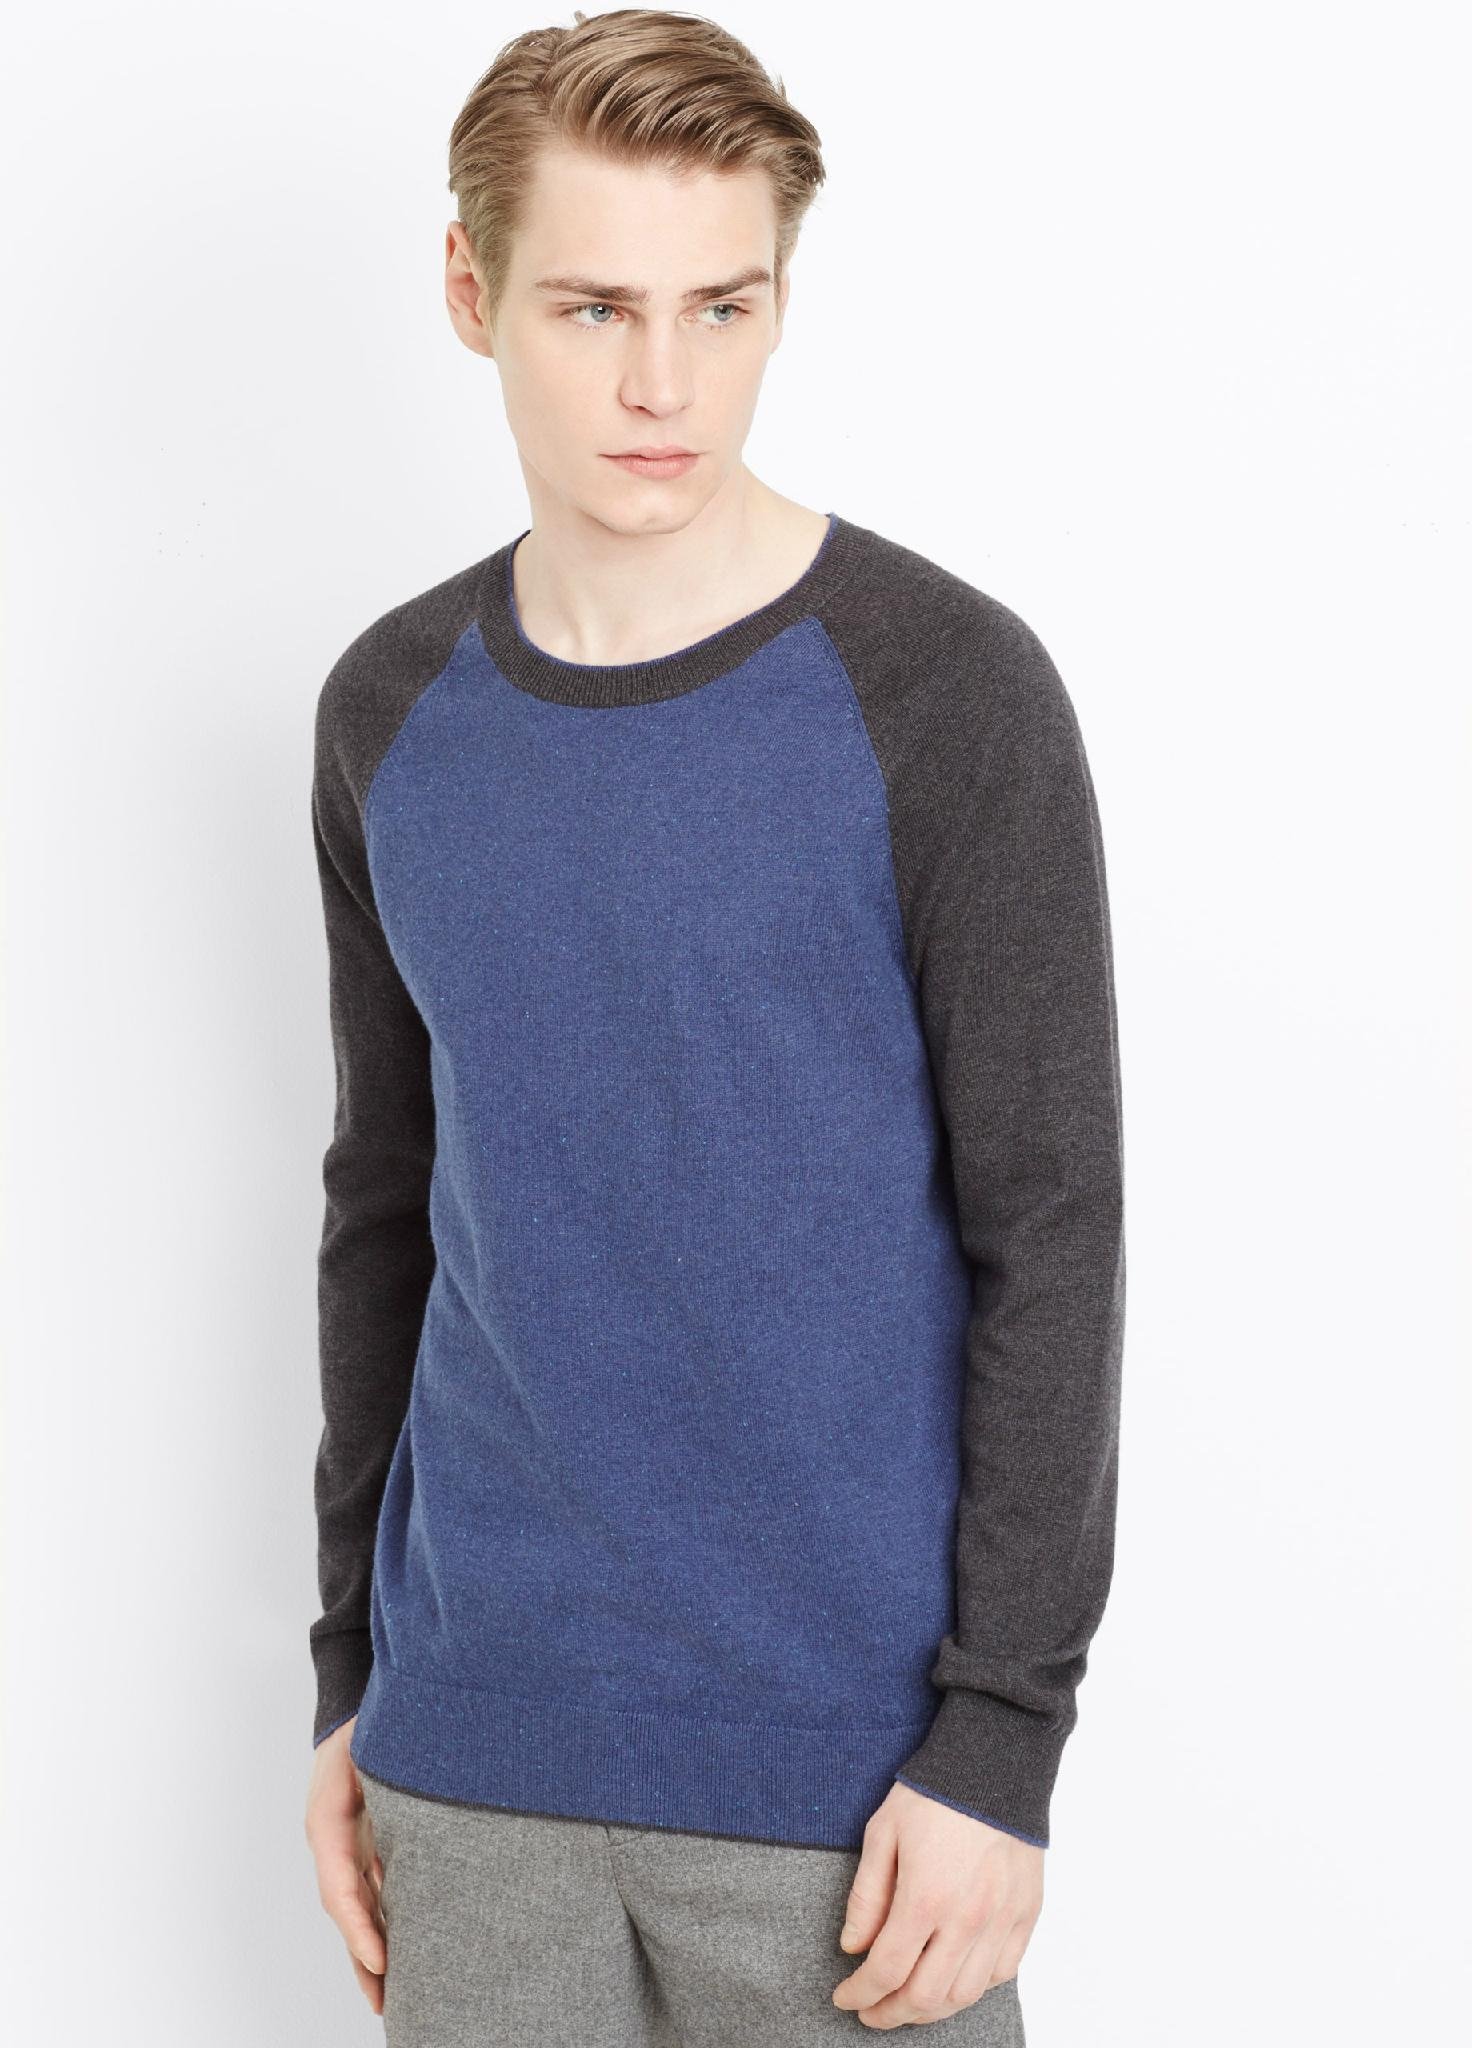 cotton cashmere sweater men crew neck sweaters two colors knitwear - CF ...